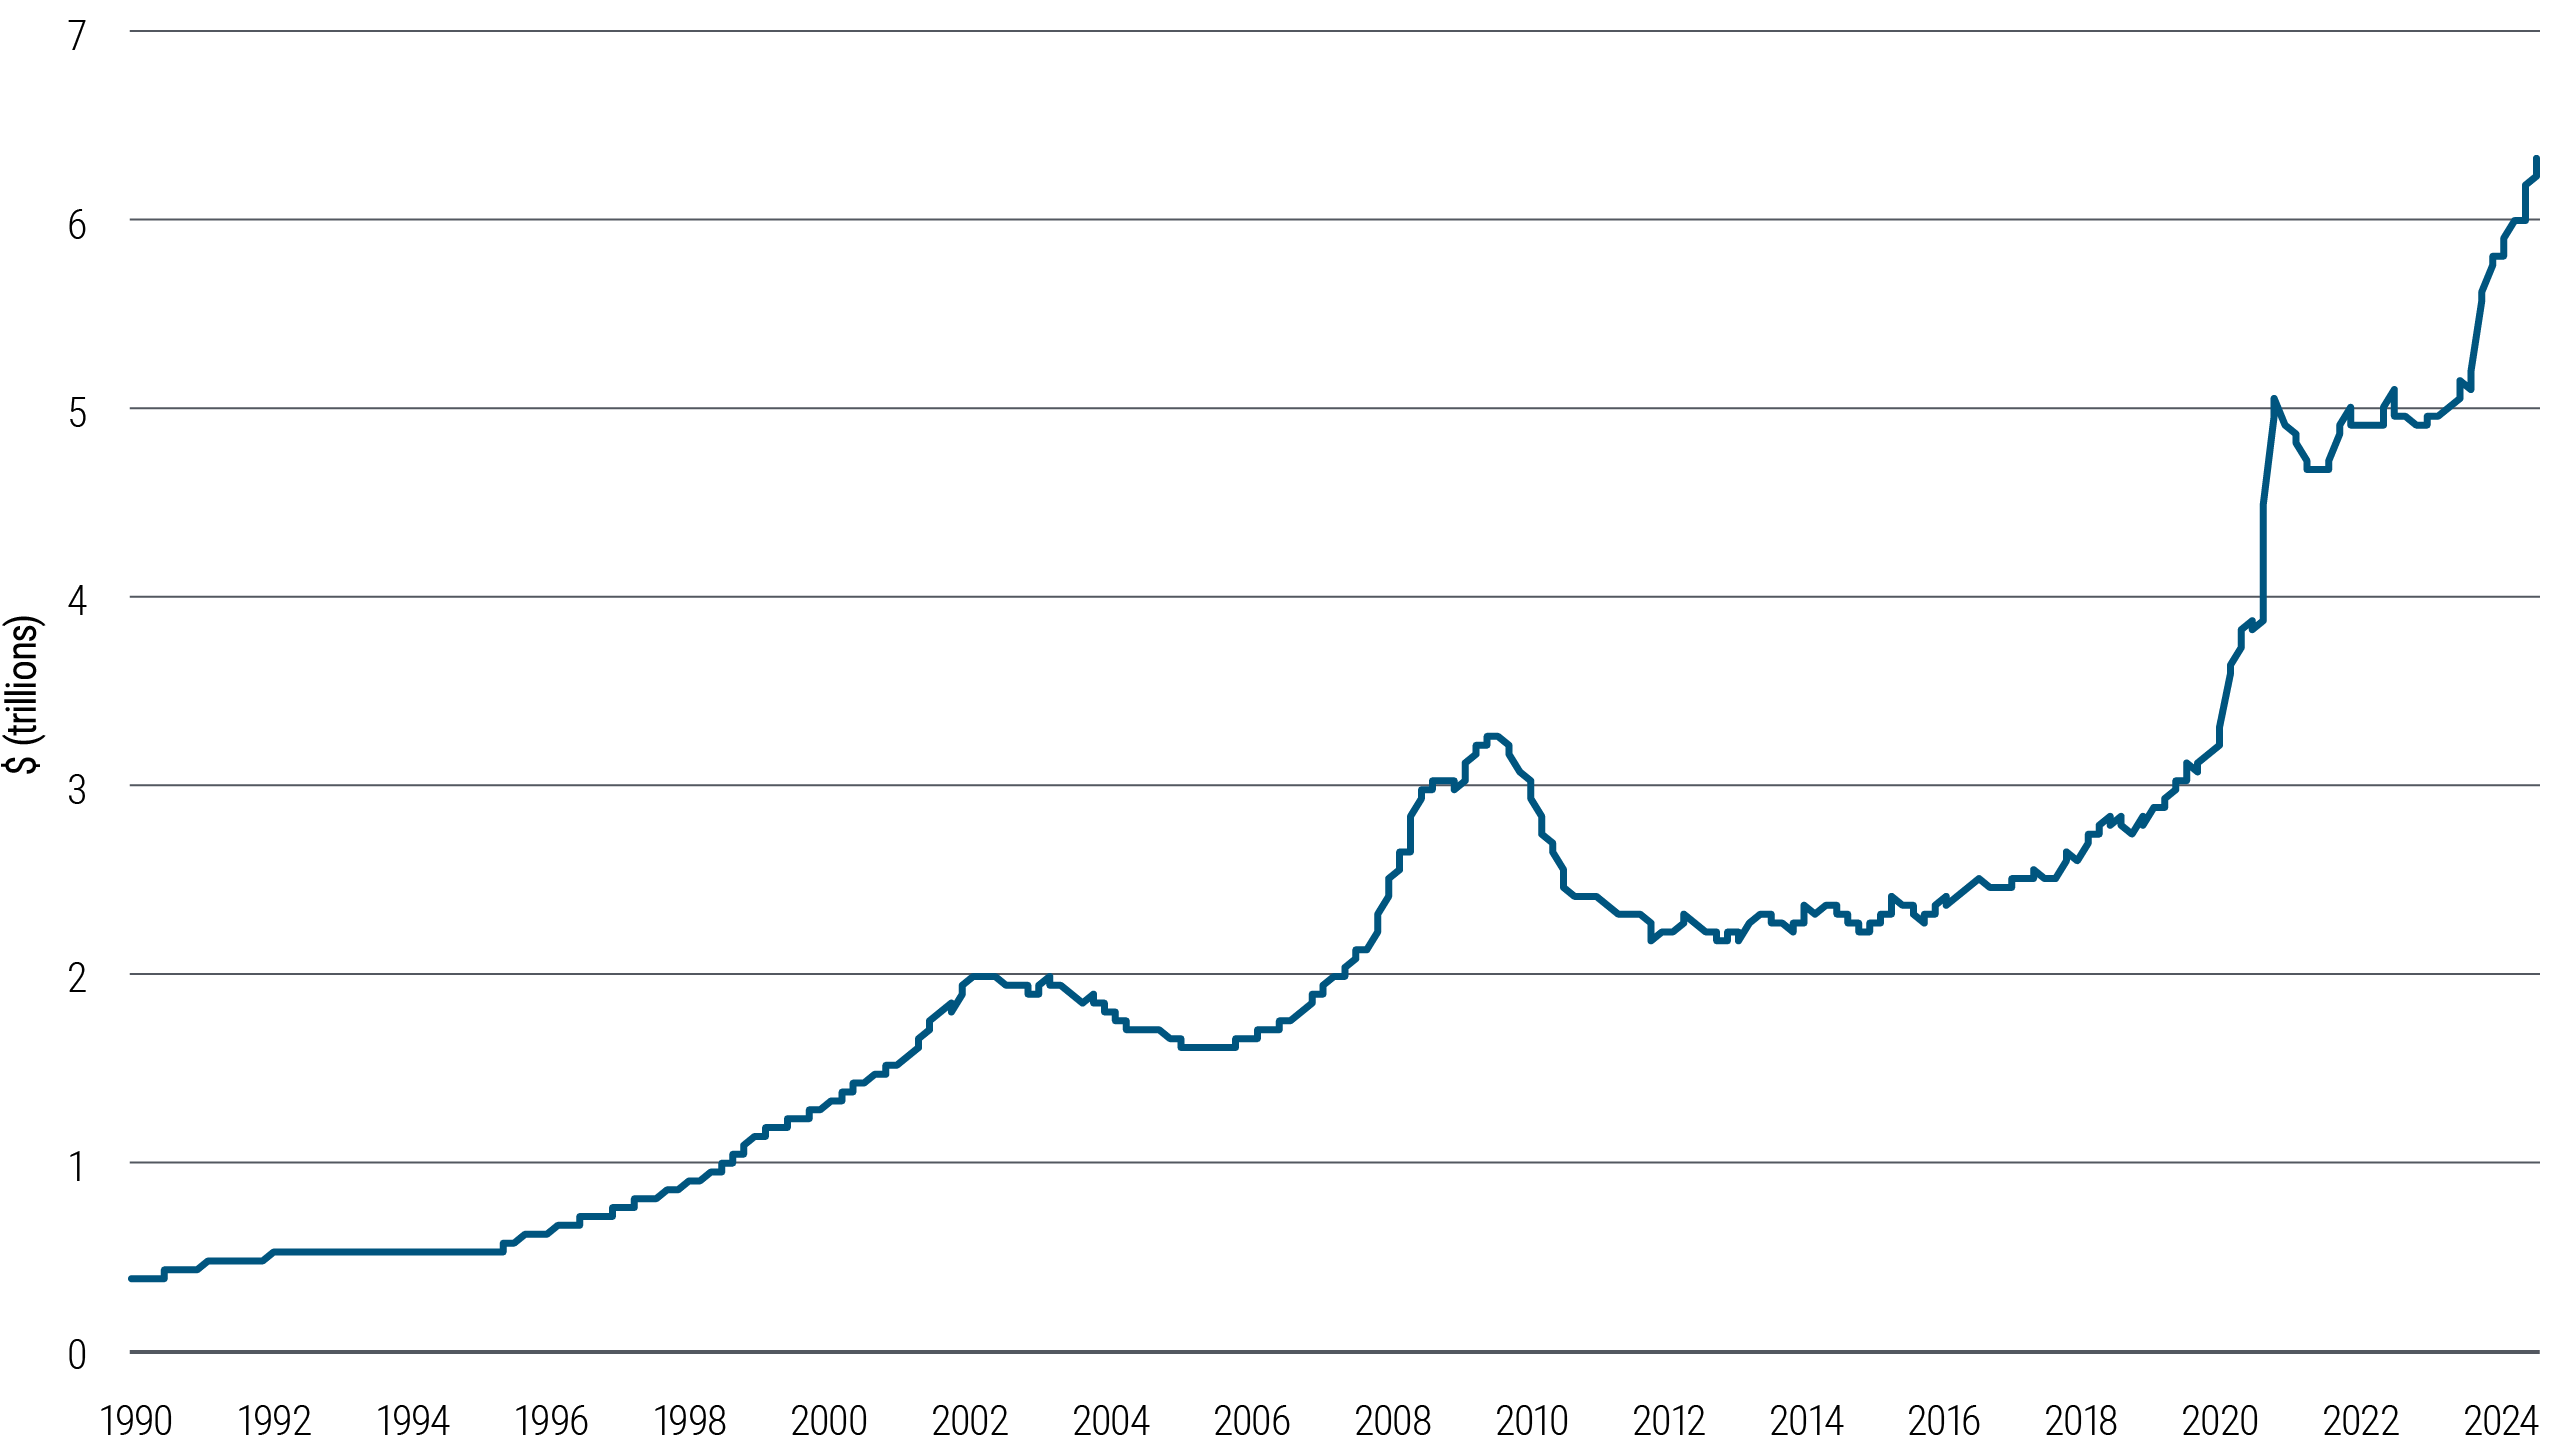 Figure 1 is a line graph showing money market fund balances from 1990 until the present, according to the U.S. Federal Reserve. The balances start at about $400 billion in 1990 and climb gradually toward $2 trillion in 2008. They rise above $3 trillion in the aftermath of the financial crisis in 2009 before dipping back below that level for about a decade. They then surge to about $5 trillion at the start of the pandemic, hold steady through 2022, and then rise to a peak of about $6.3 trillion in early 2024.